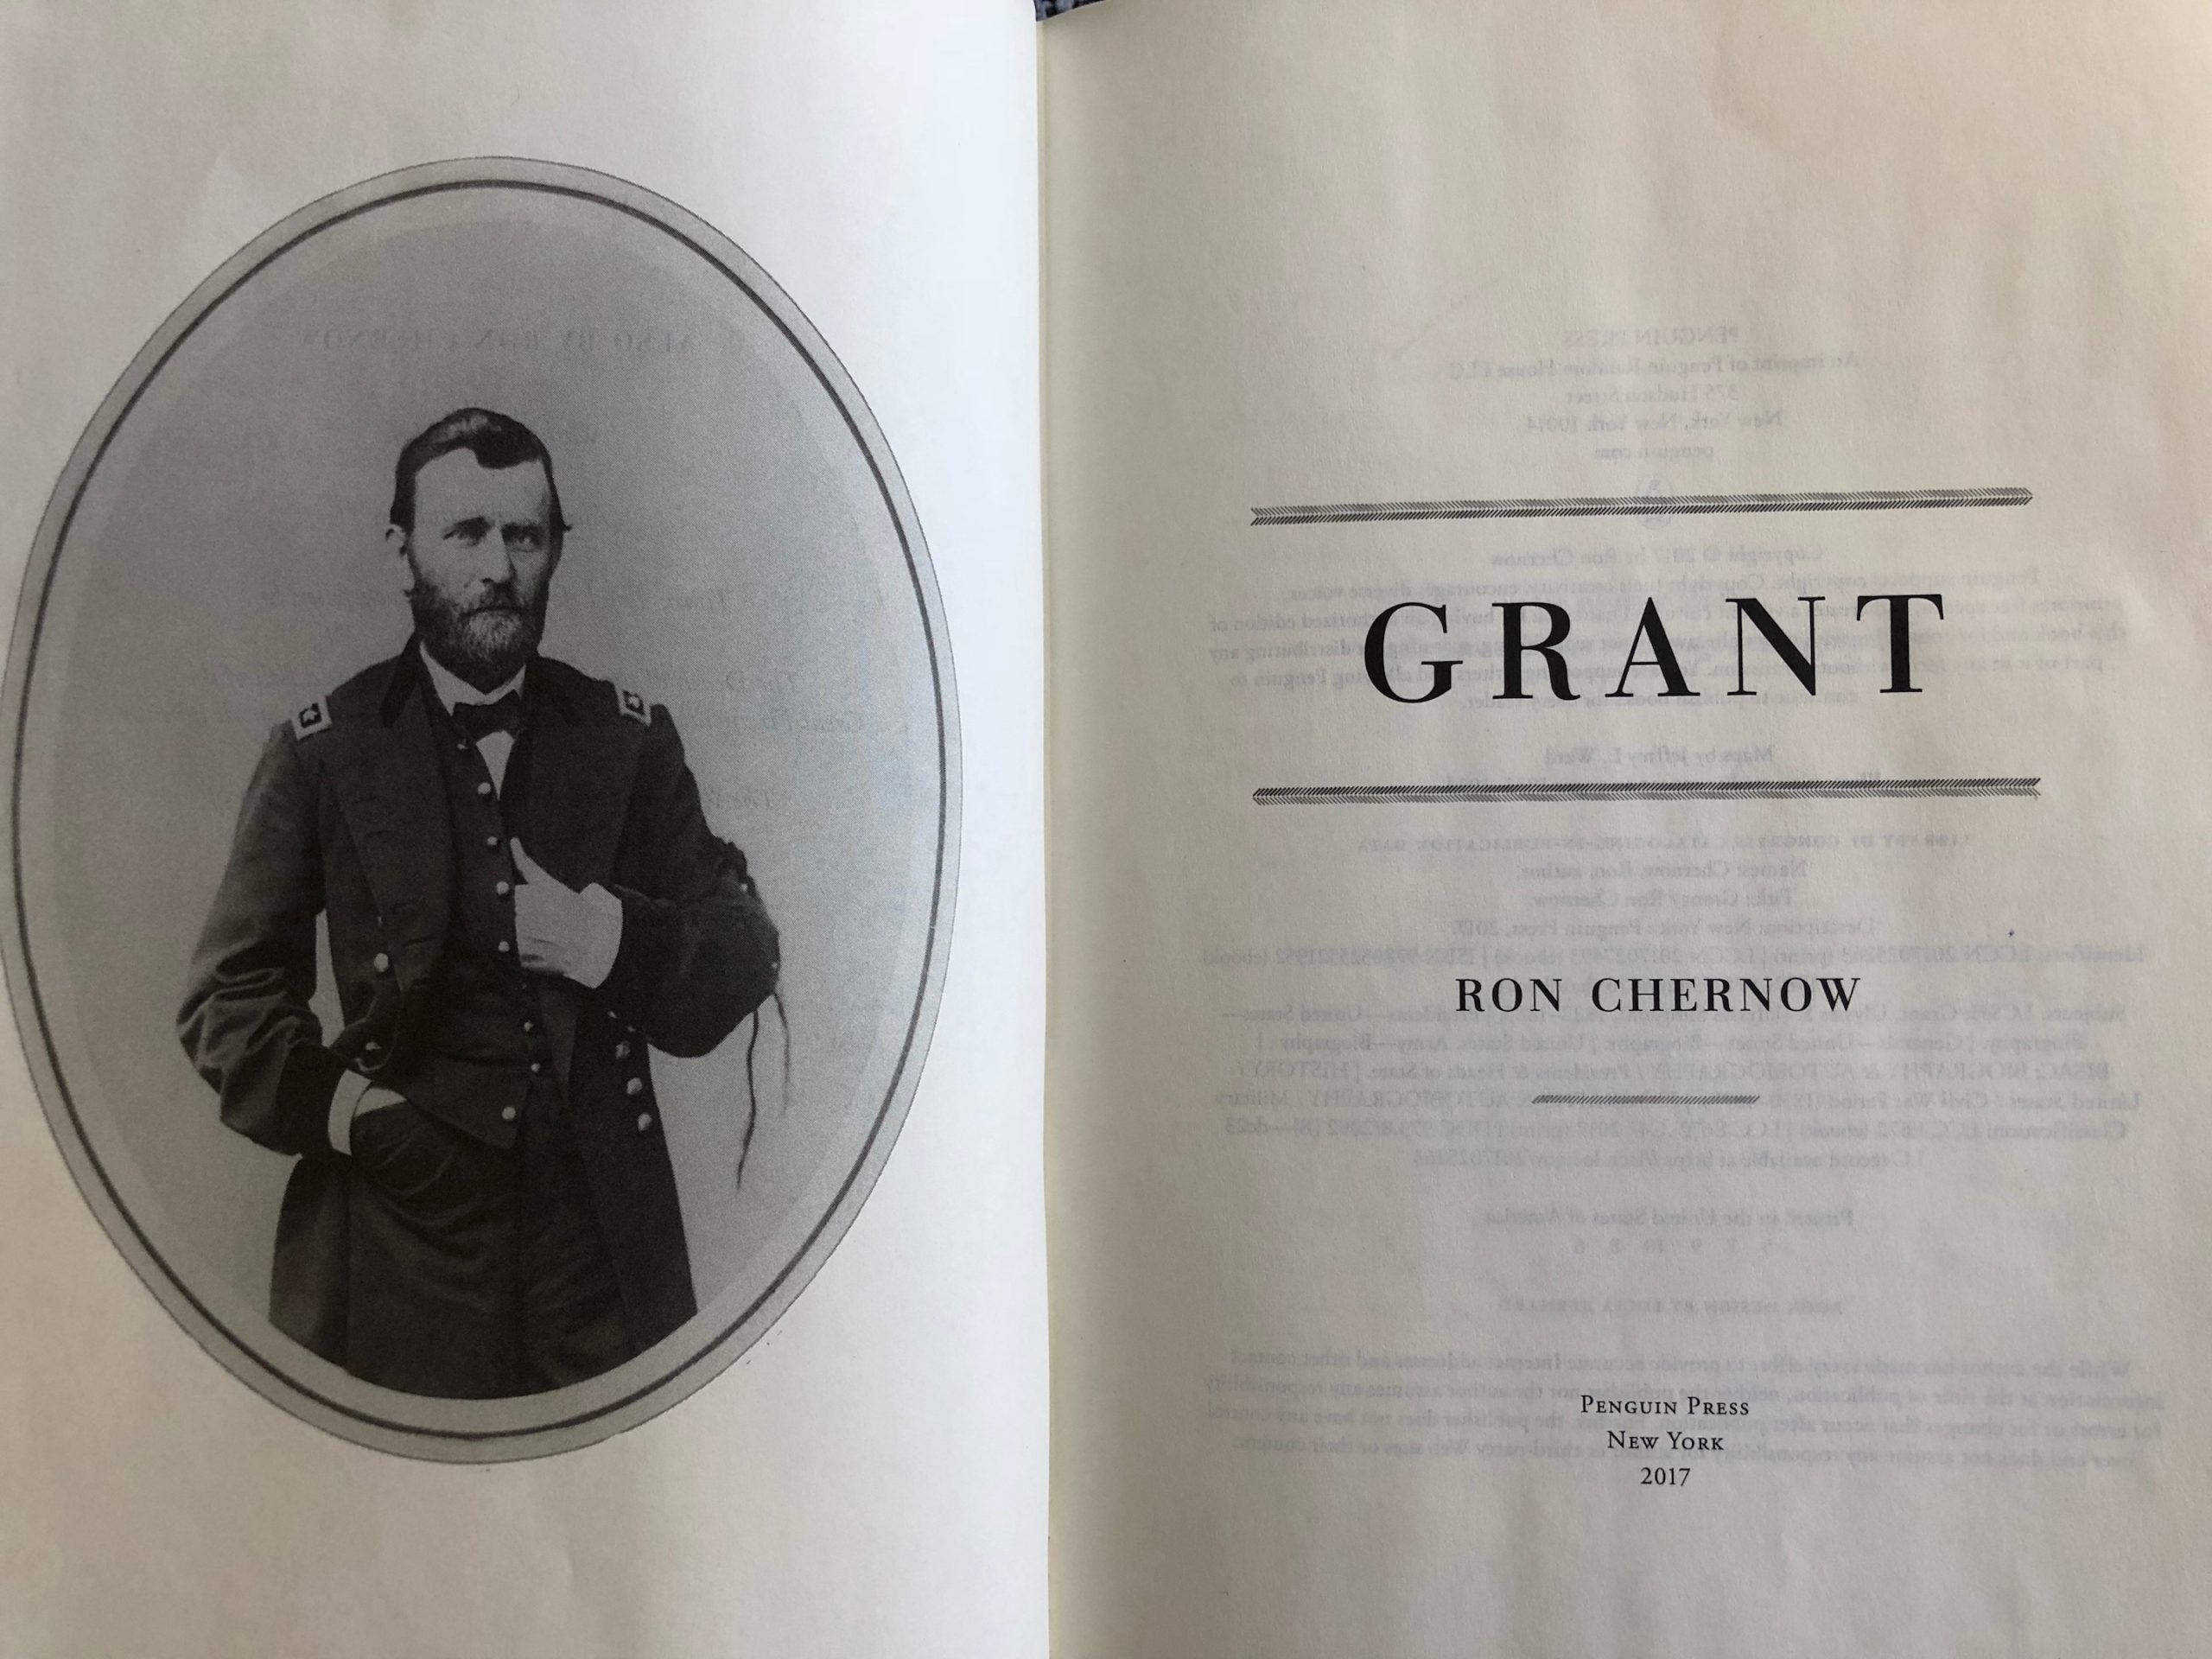 Ulysses S Grant by Ron Chernow